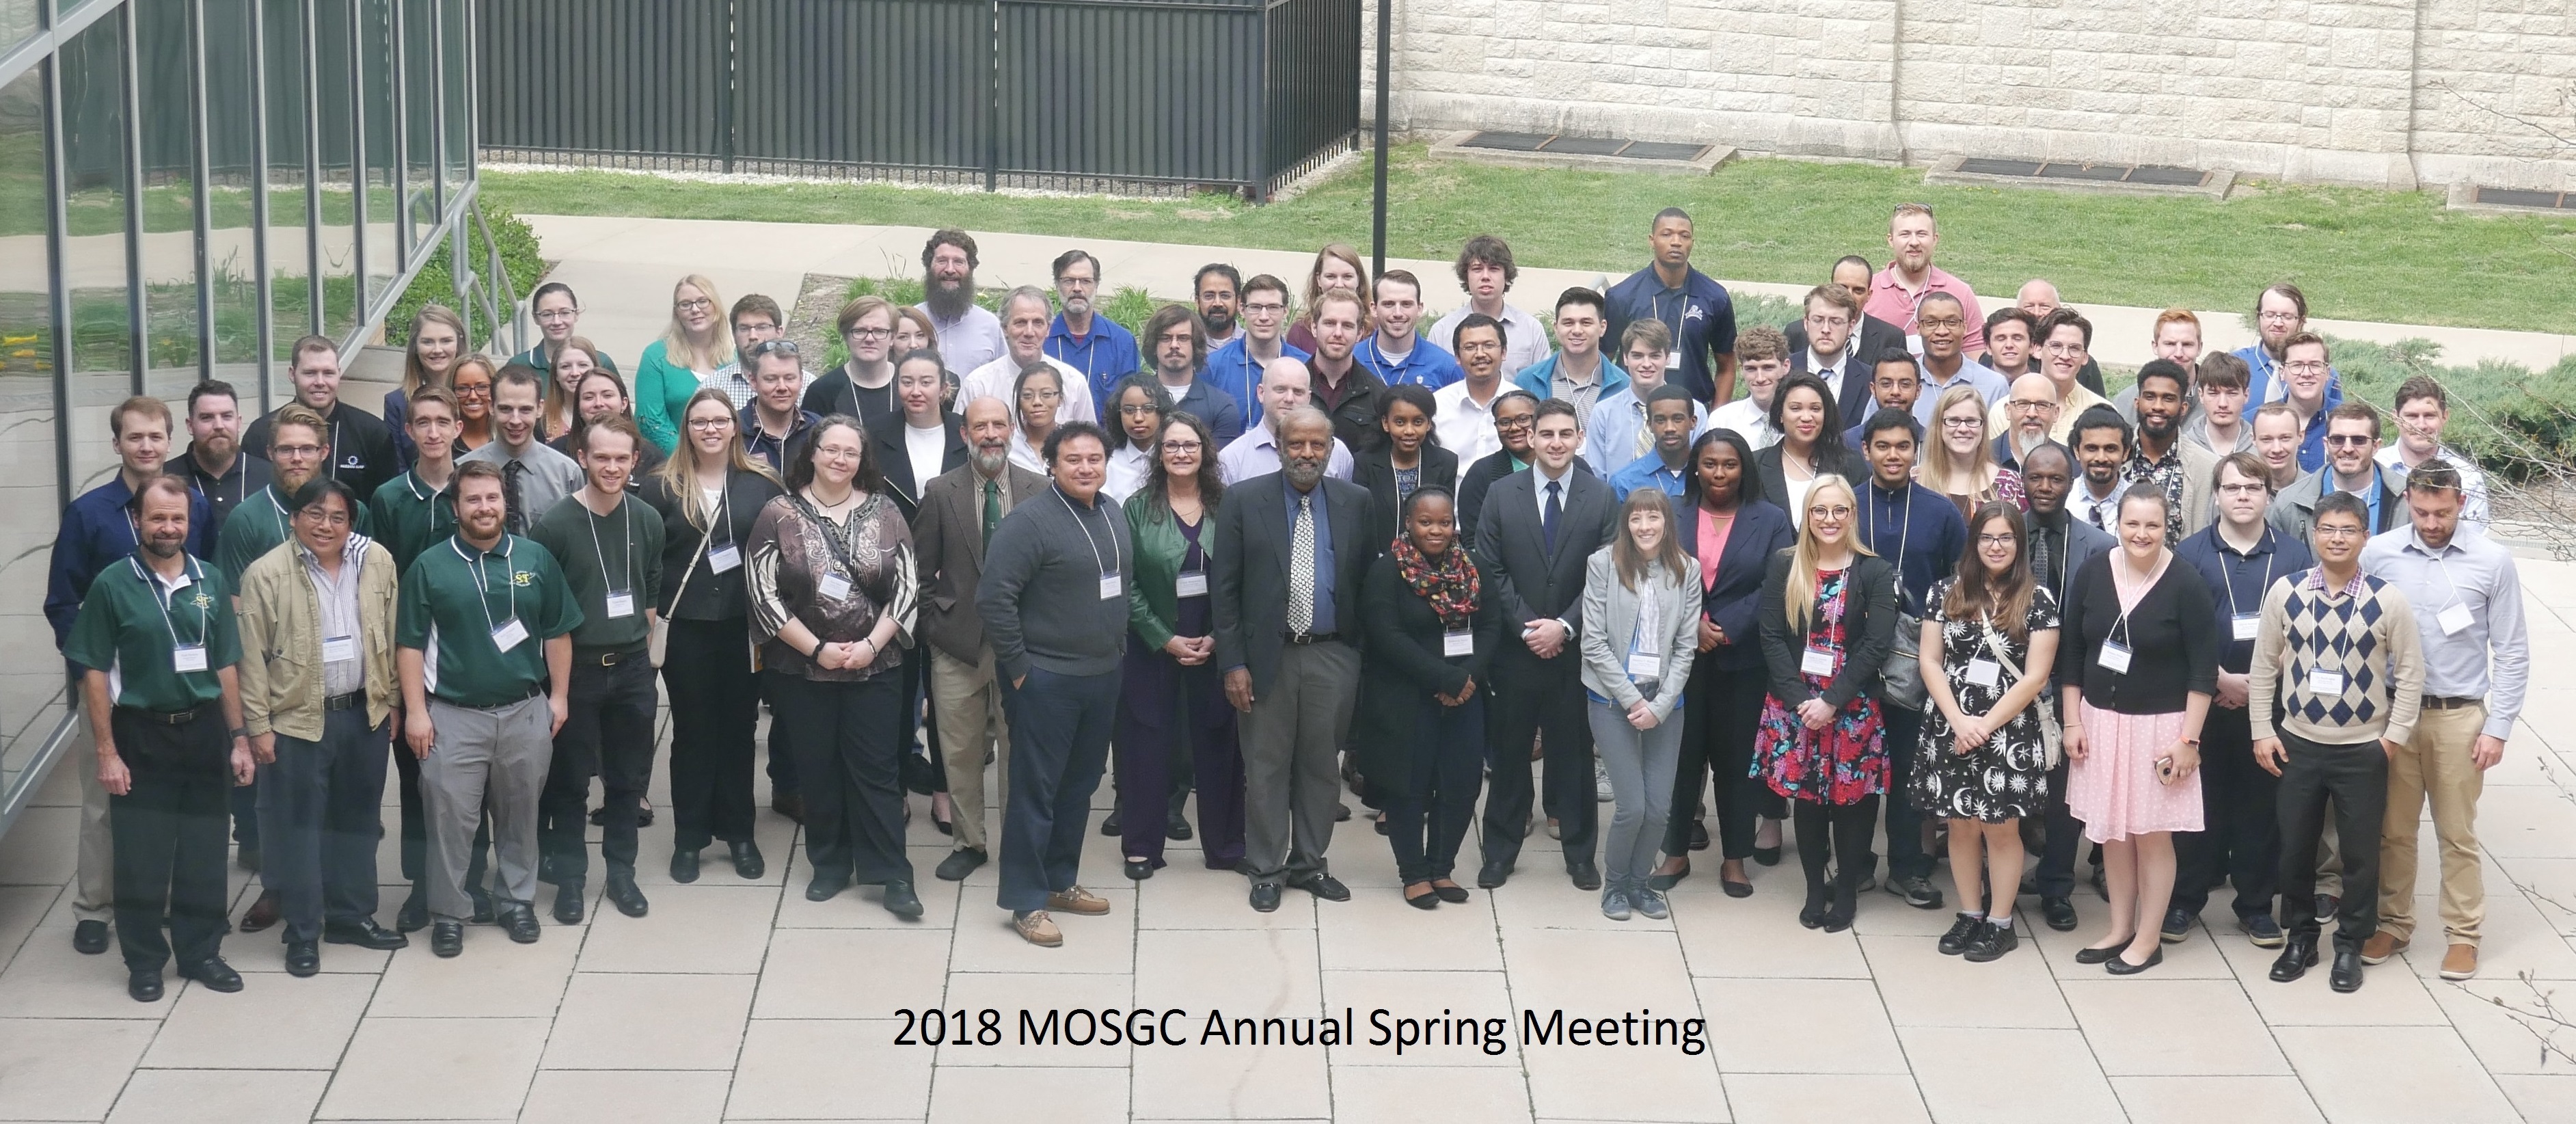 Group Photo of the 2018 MOSGC Annual Spring Meeting